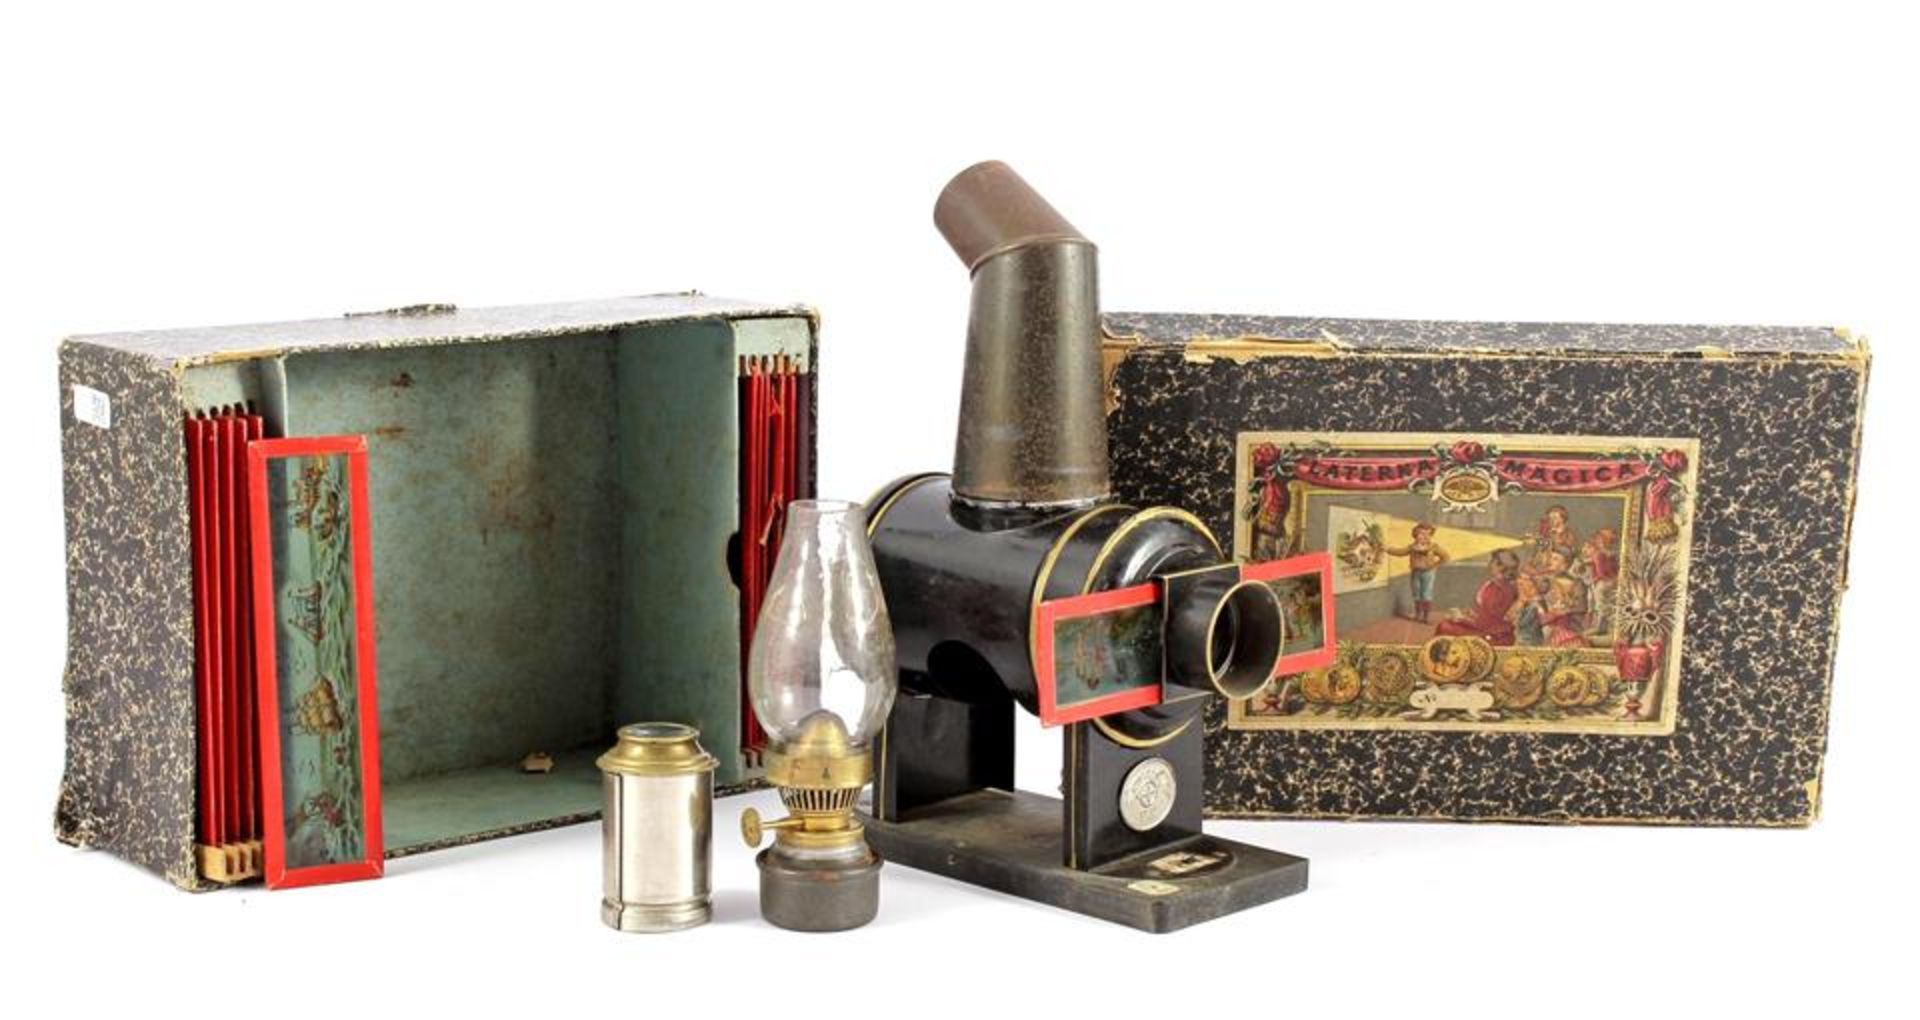 Laterna Magica magic lantern with various glass plates in original box (box in bad condition)